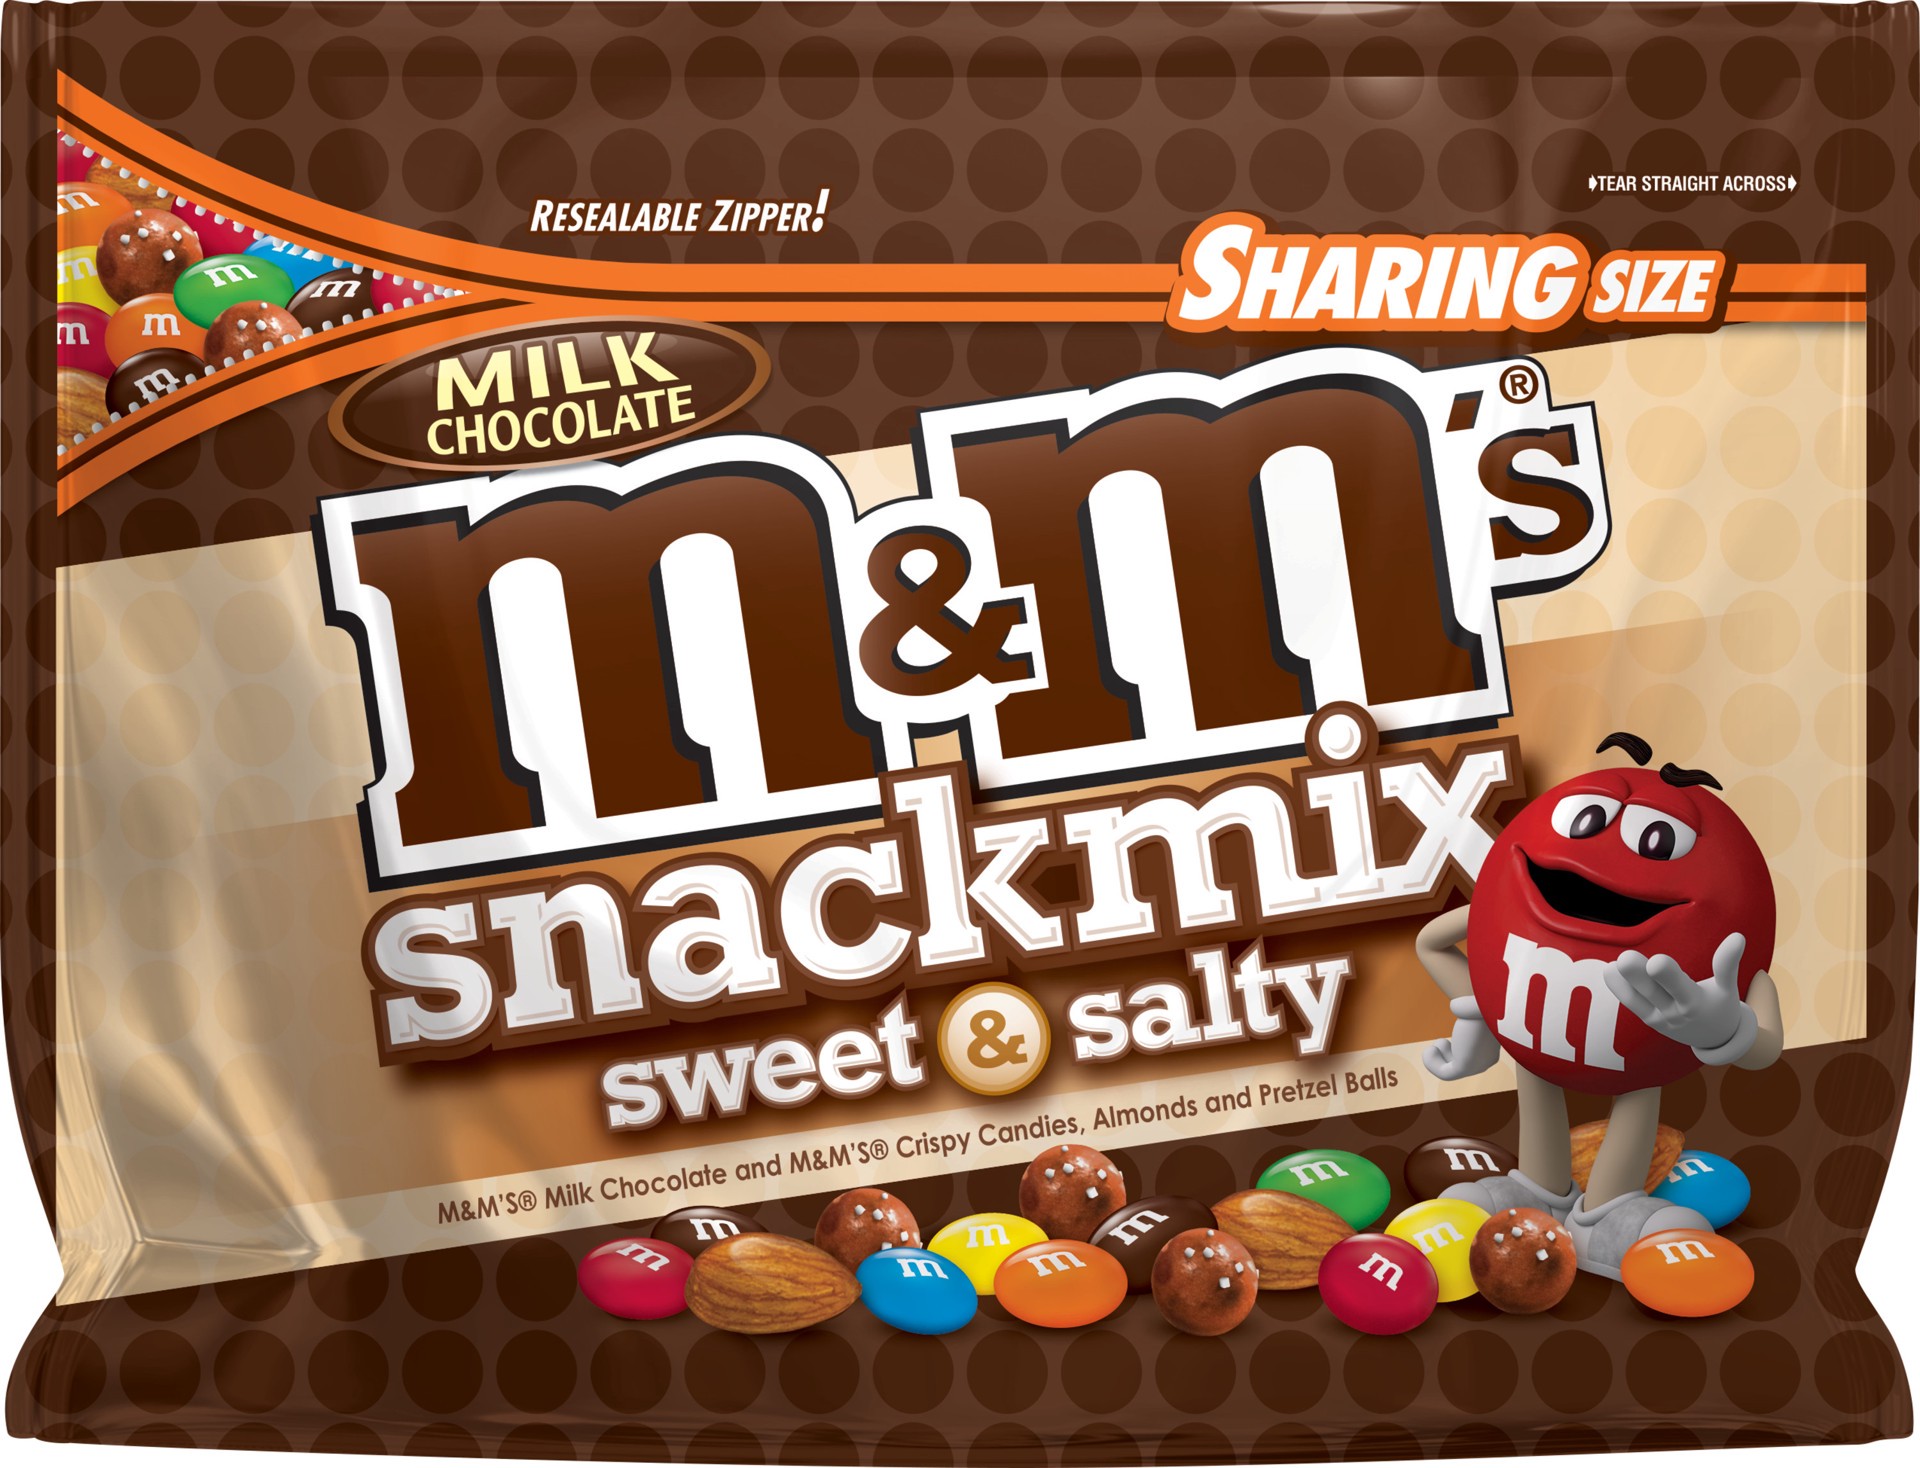 slide 1 of 3, M&M'S Milk Chocolate Snack Mix Sweet & Salty Sharing Size 7.7 Ounce Pouch, 7 oz